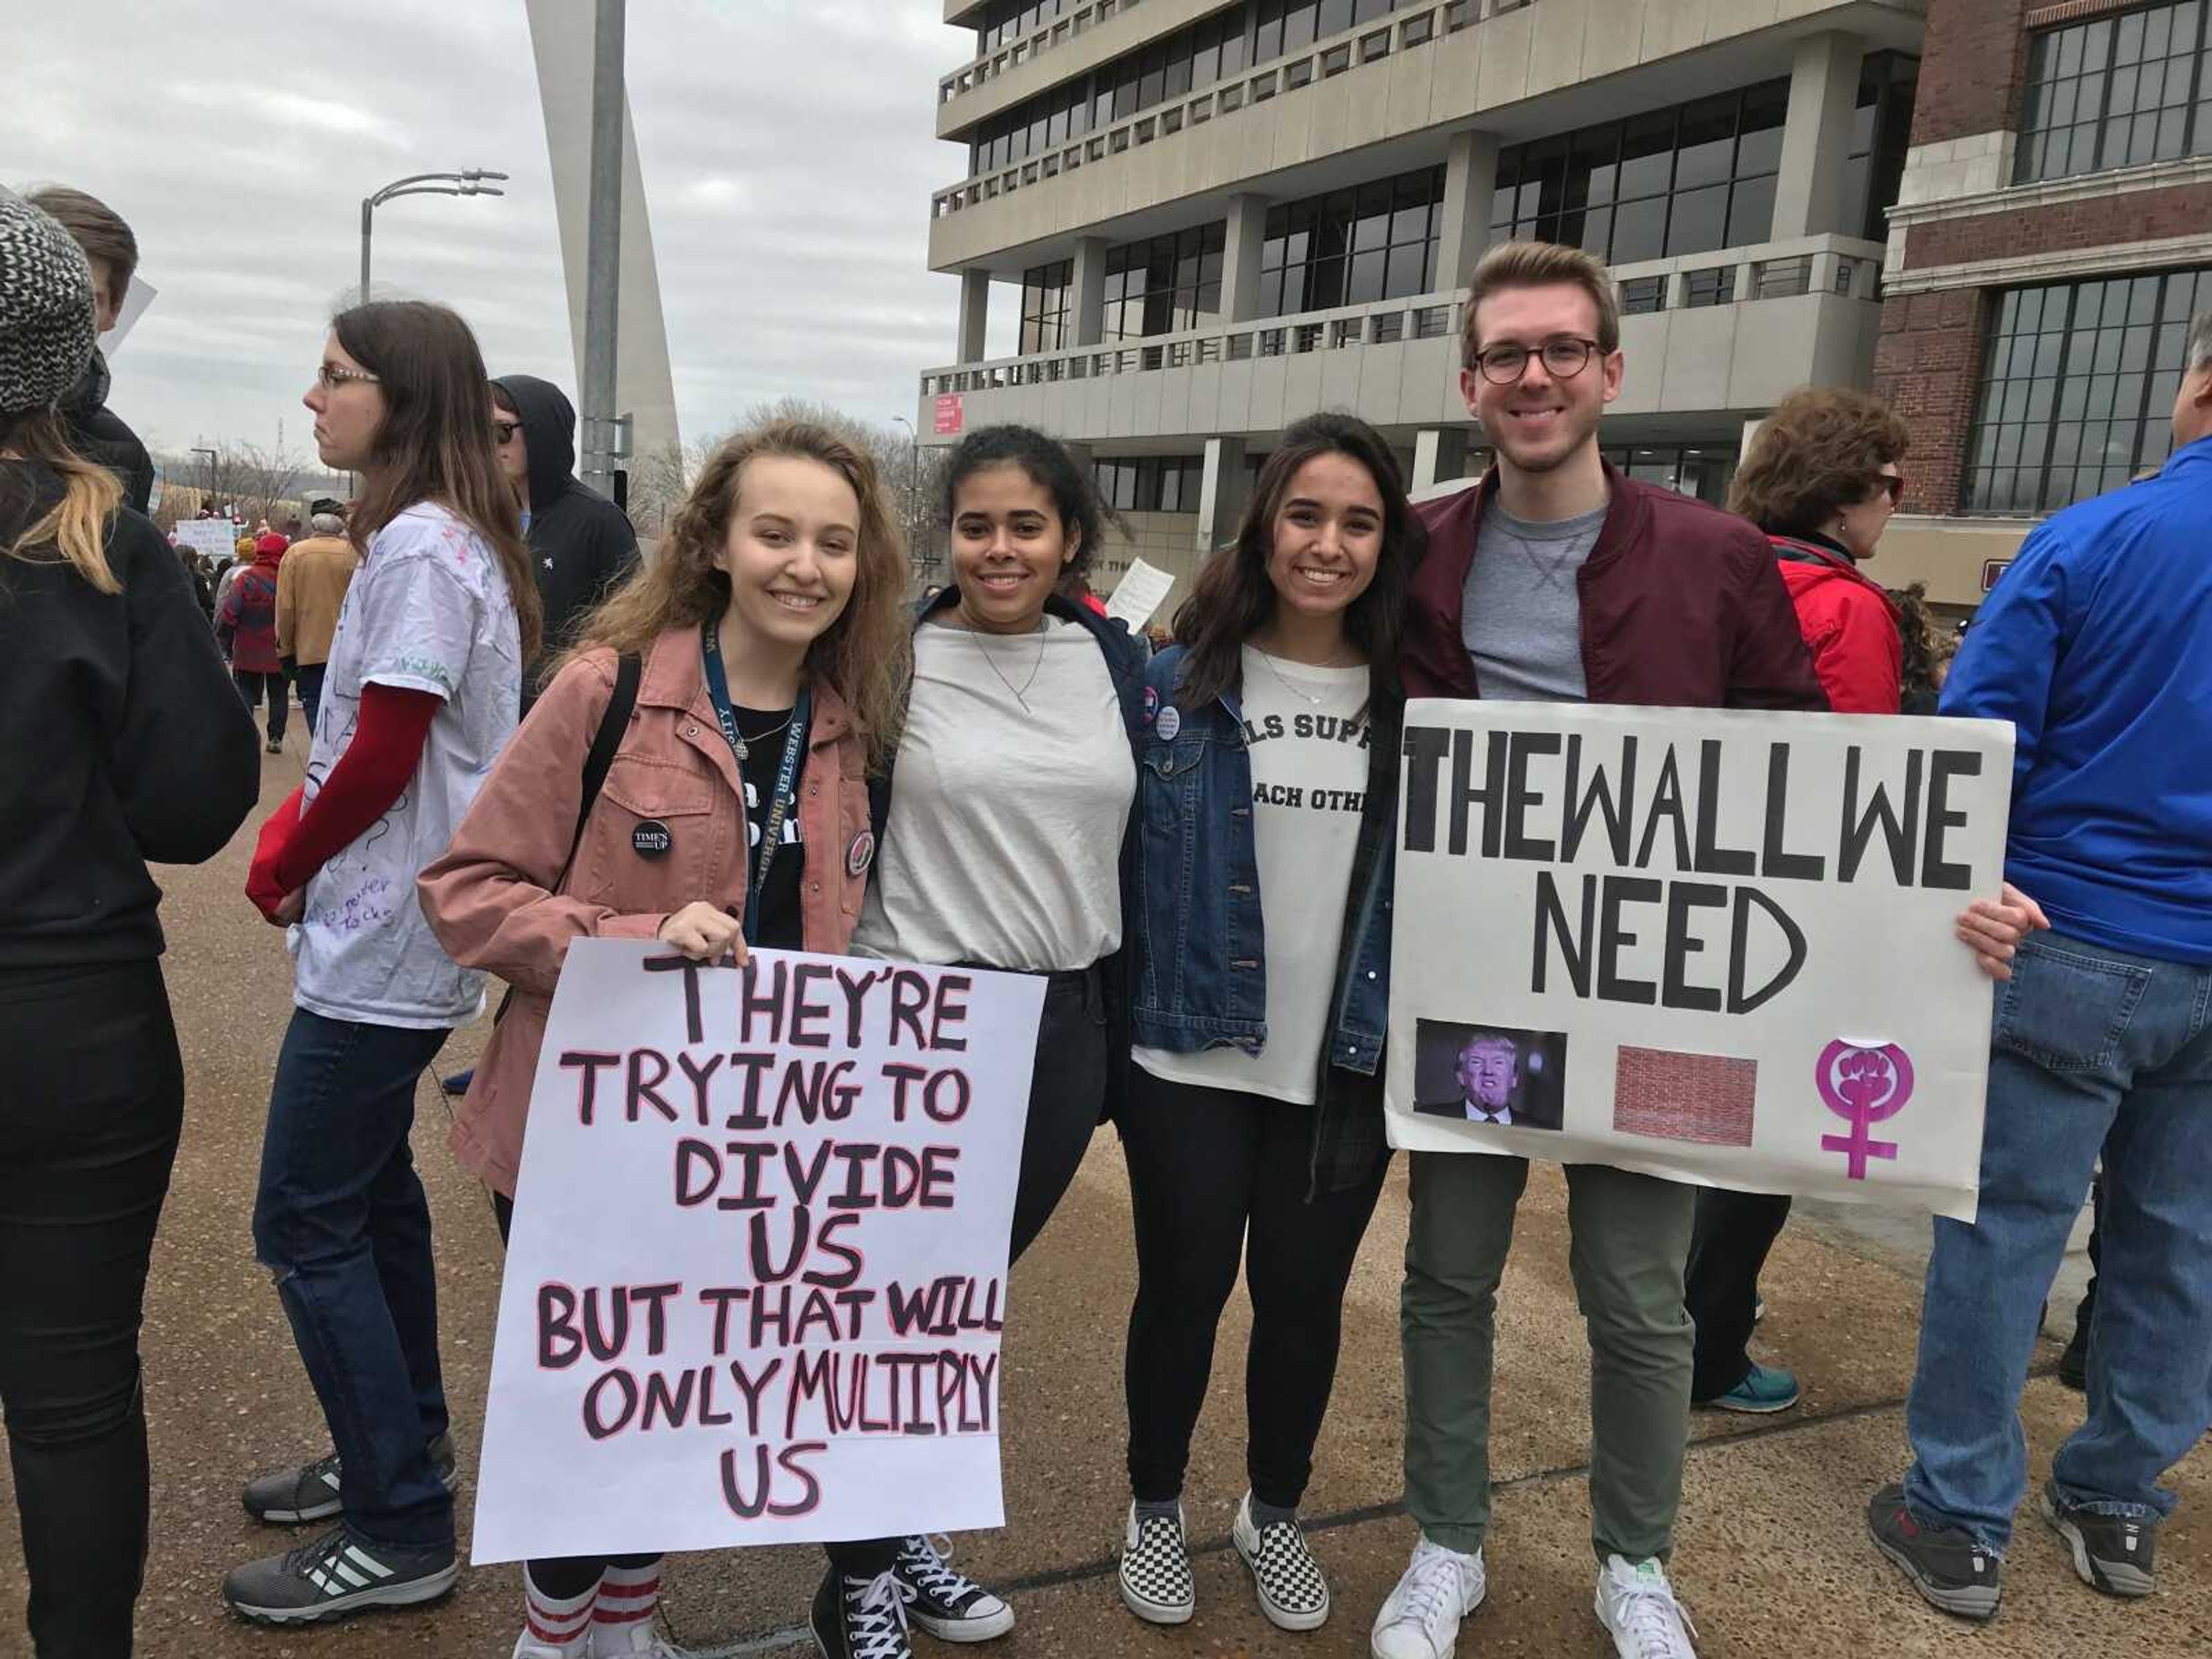 From left to right: Adrianna Dreckmann, Tatiana Abellard, Norah Okilee and Southeast student Eli Bohnert attended the Women’s March in St. Louis on Jan. 20.